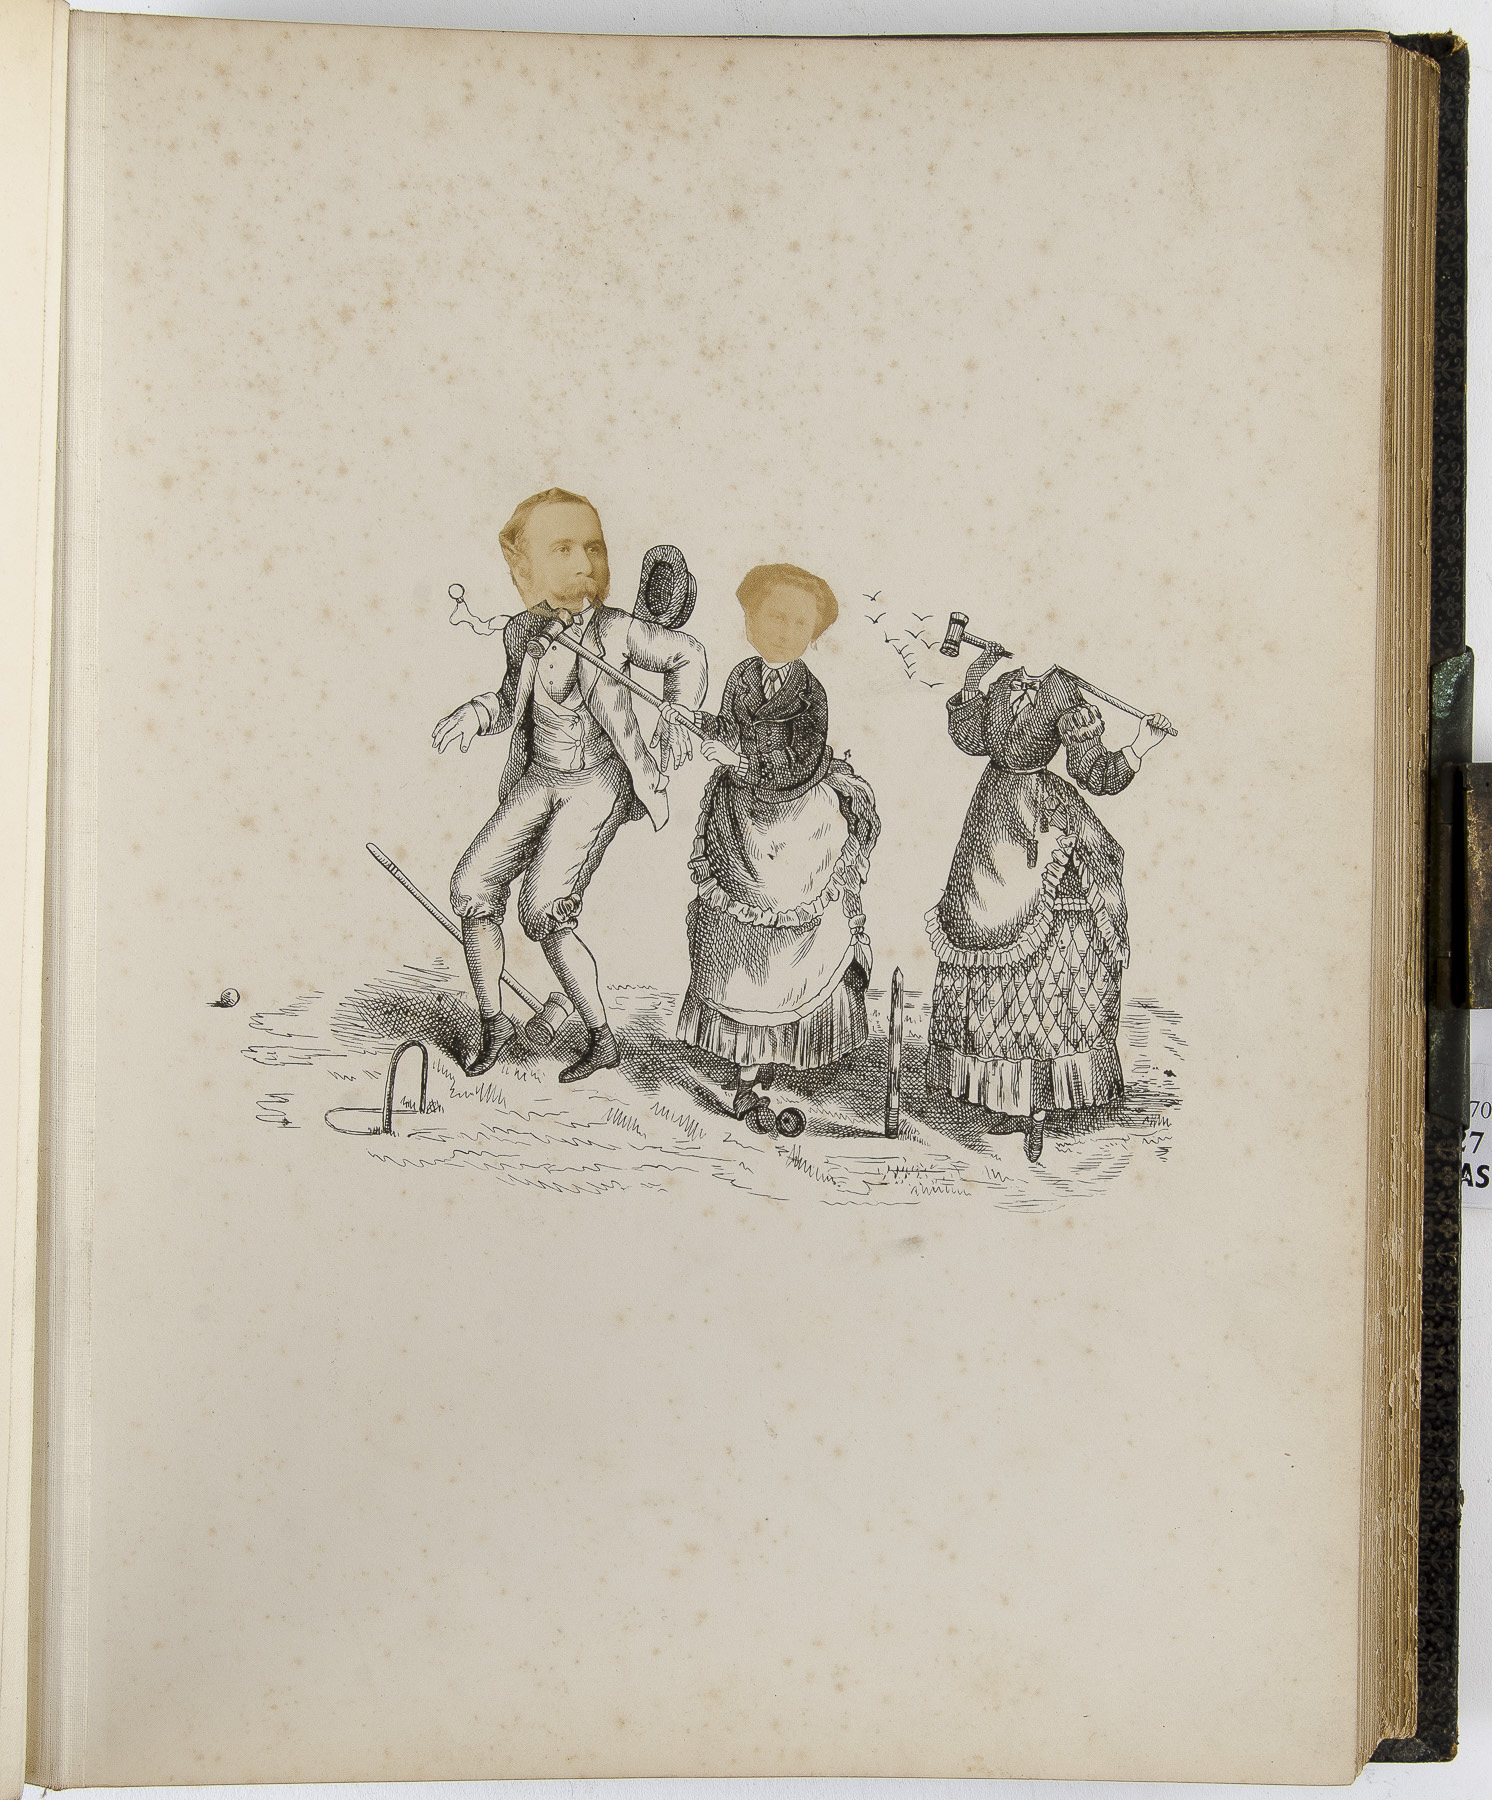 An Unusual 19th Century Album with Pre-Printed Magic Lantern Pose Style Engravings, showing 22